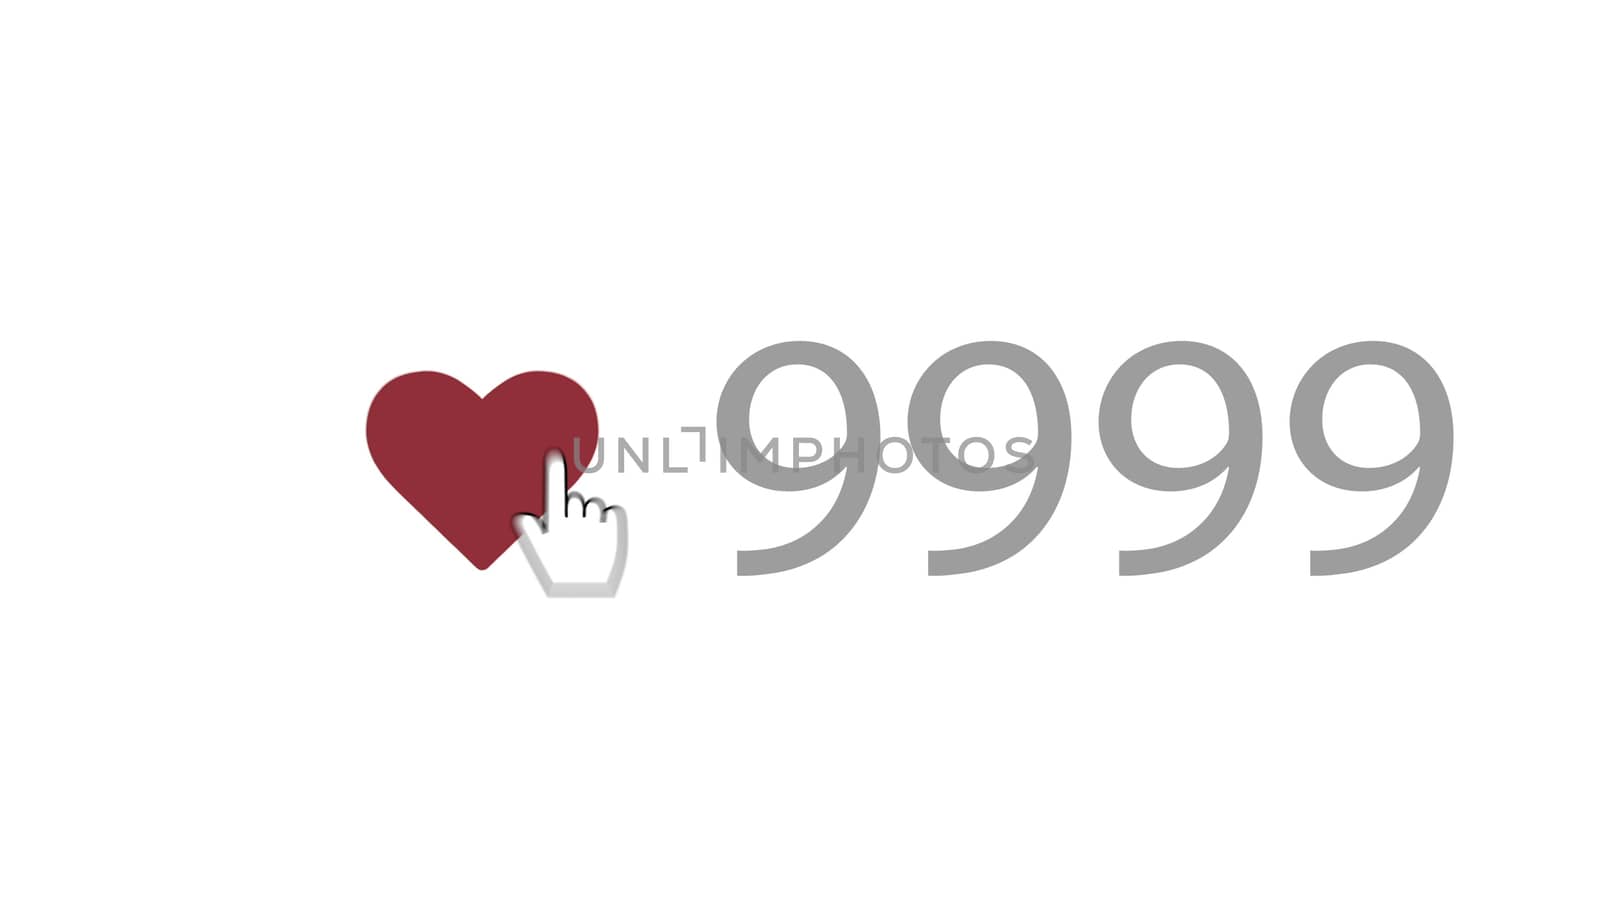 Love You Sign 9999 by klss